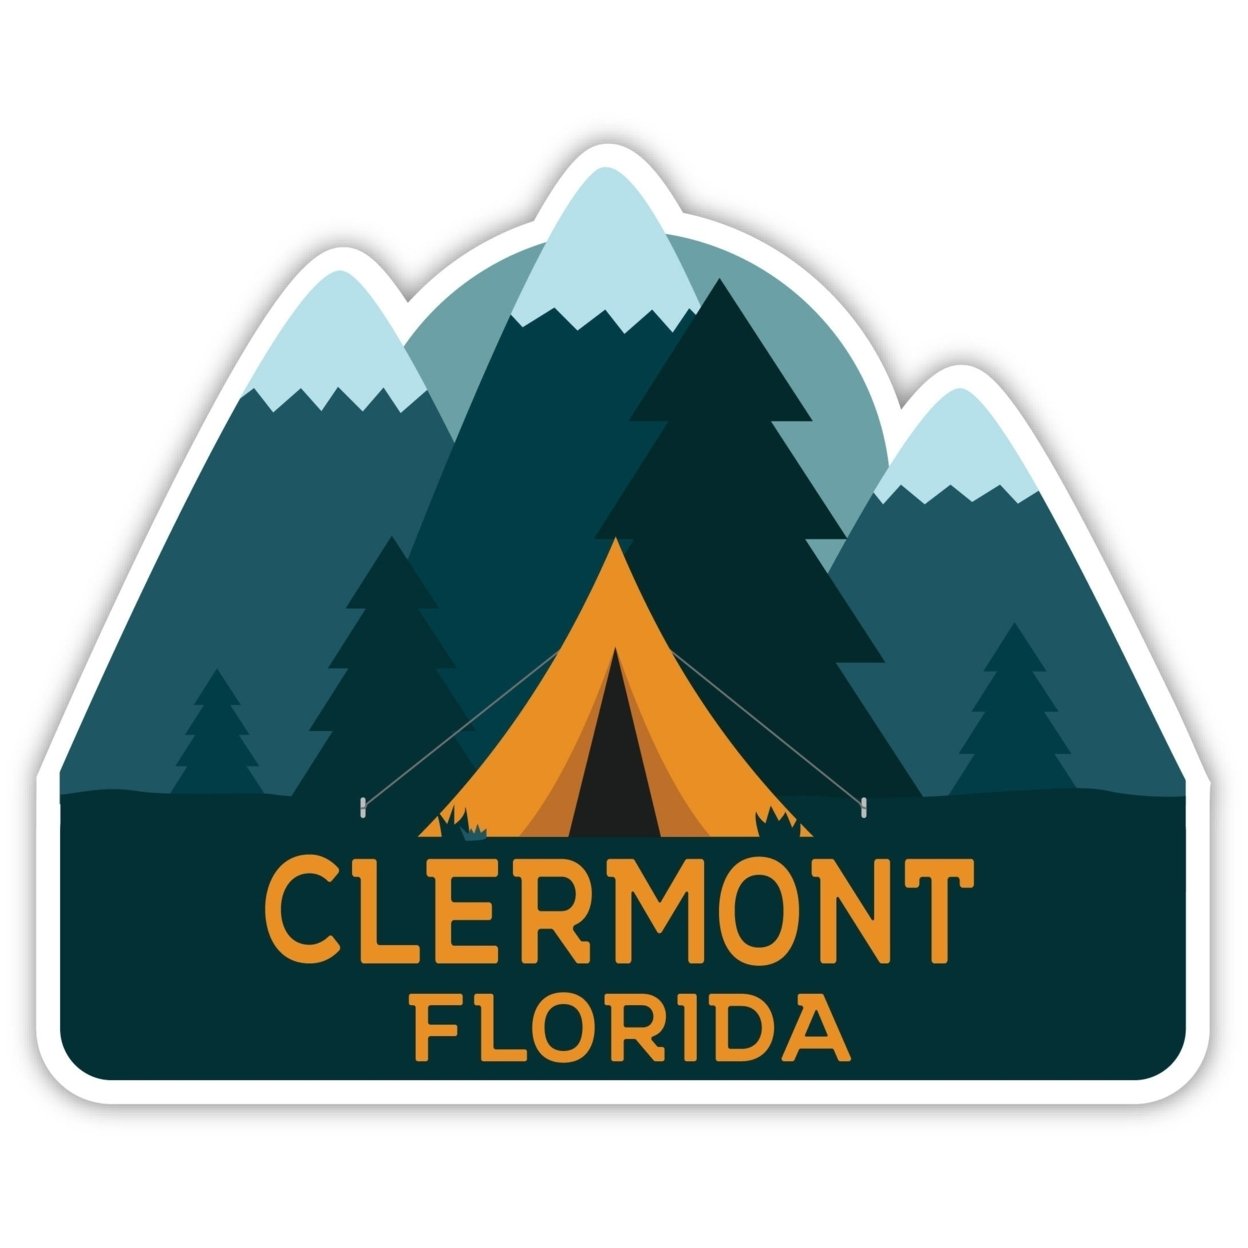 Clermont Florida Souvenir Decorative Stickers (Choose Theme And Size) - 4-Pack, 8-Inch, Tent